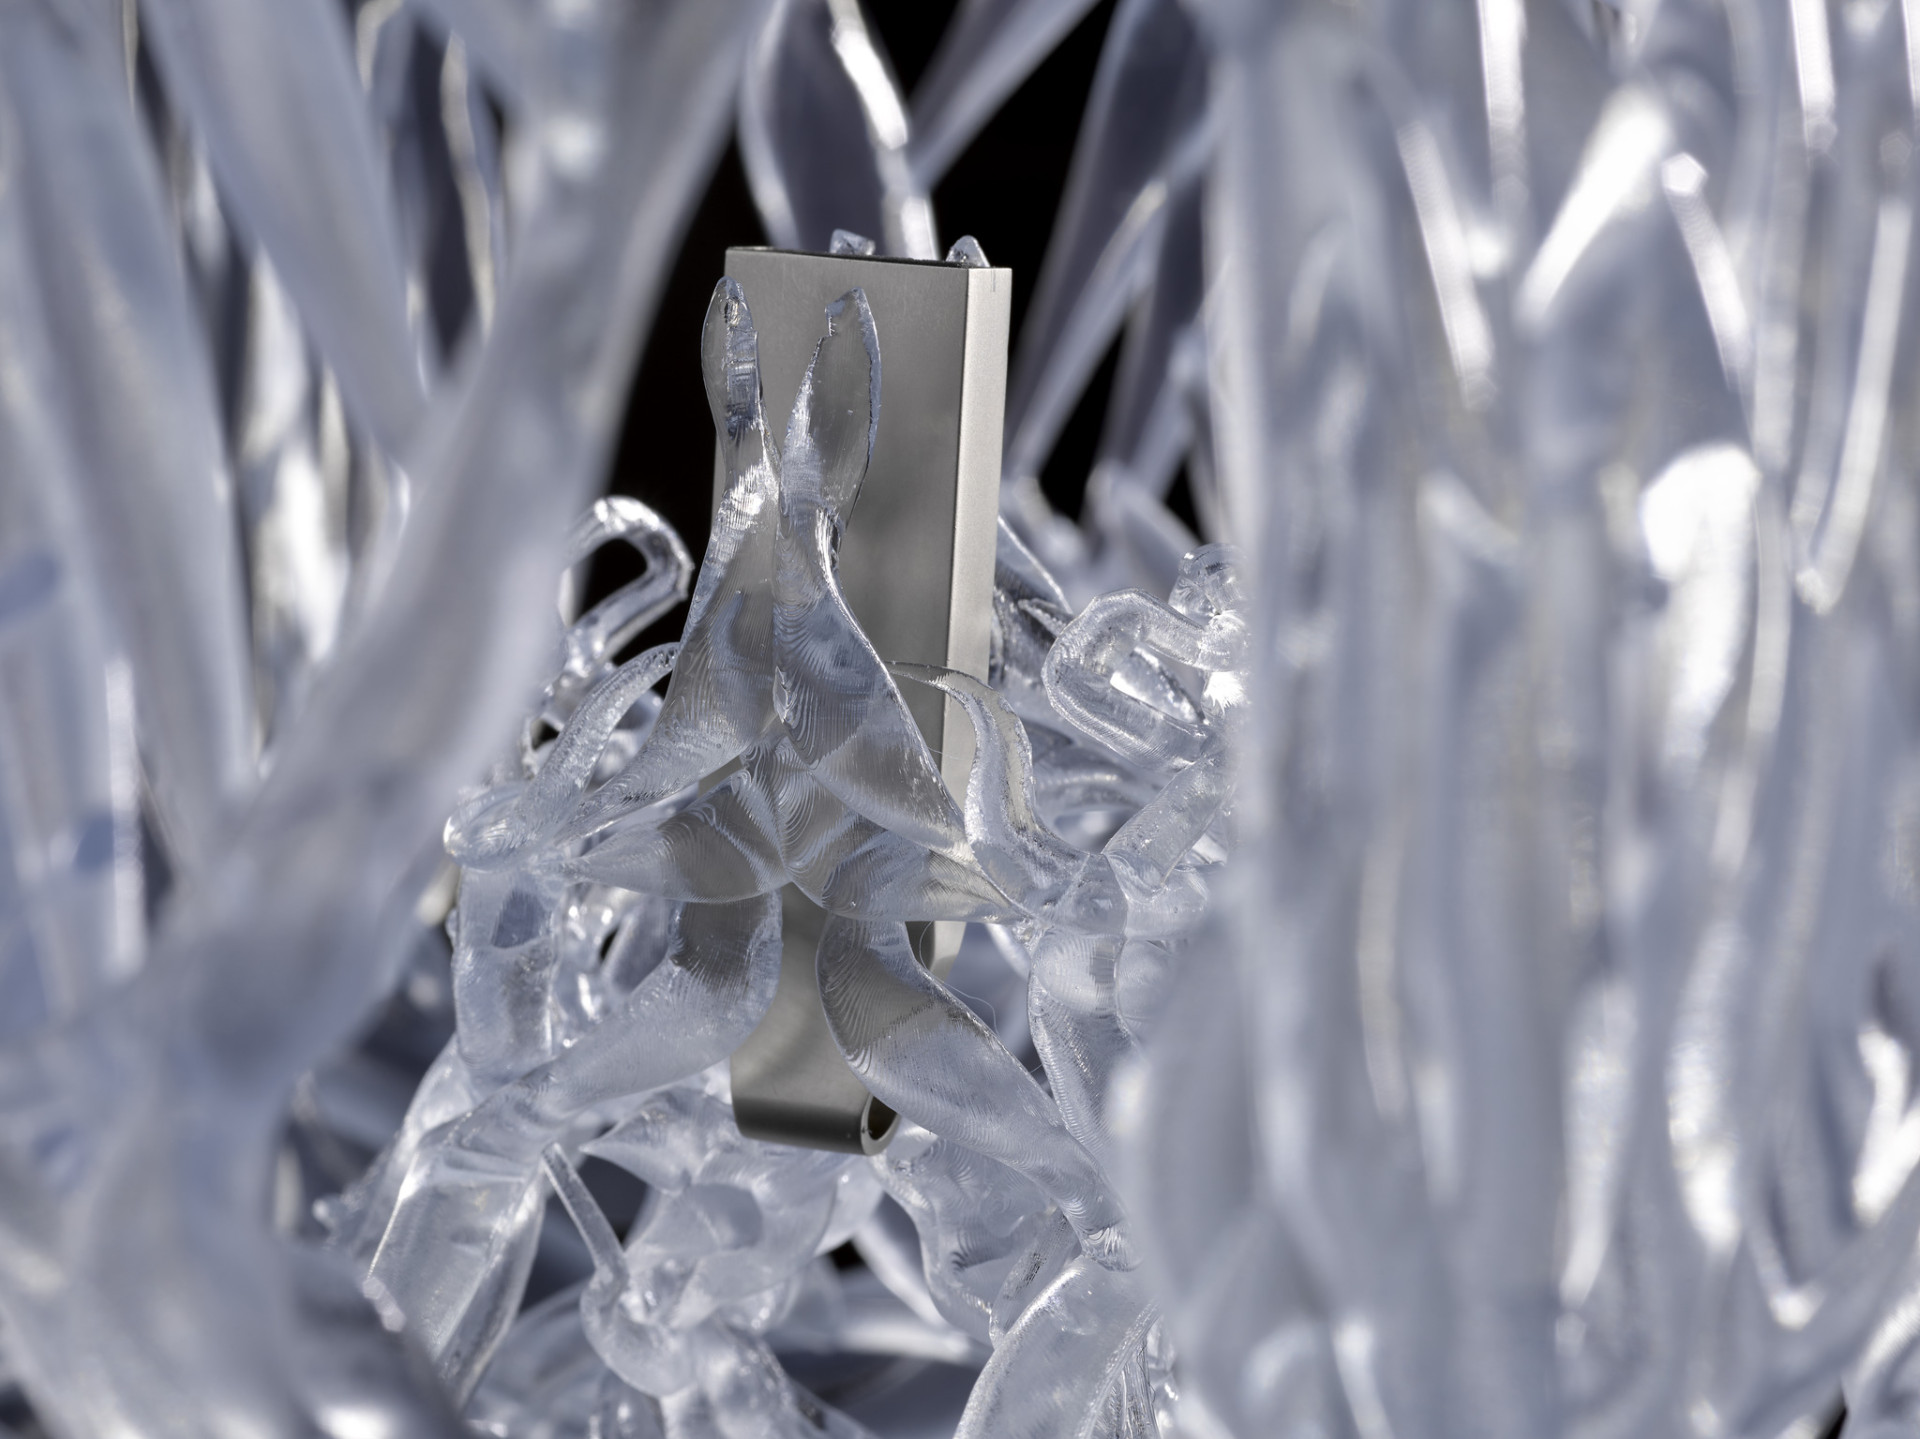 A metal memory stick encased in a tangle of white plastic semi-translucent tubes